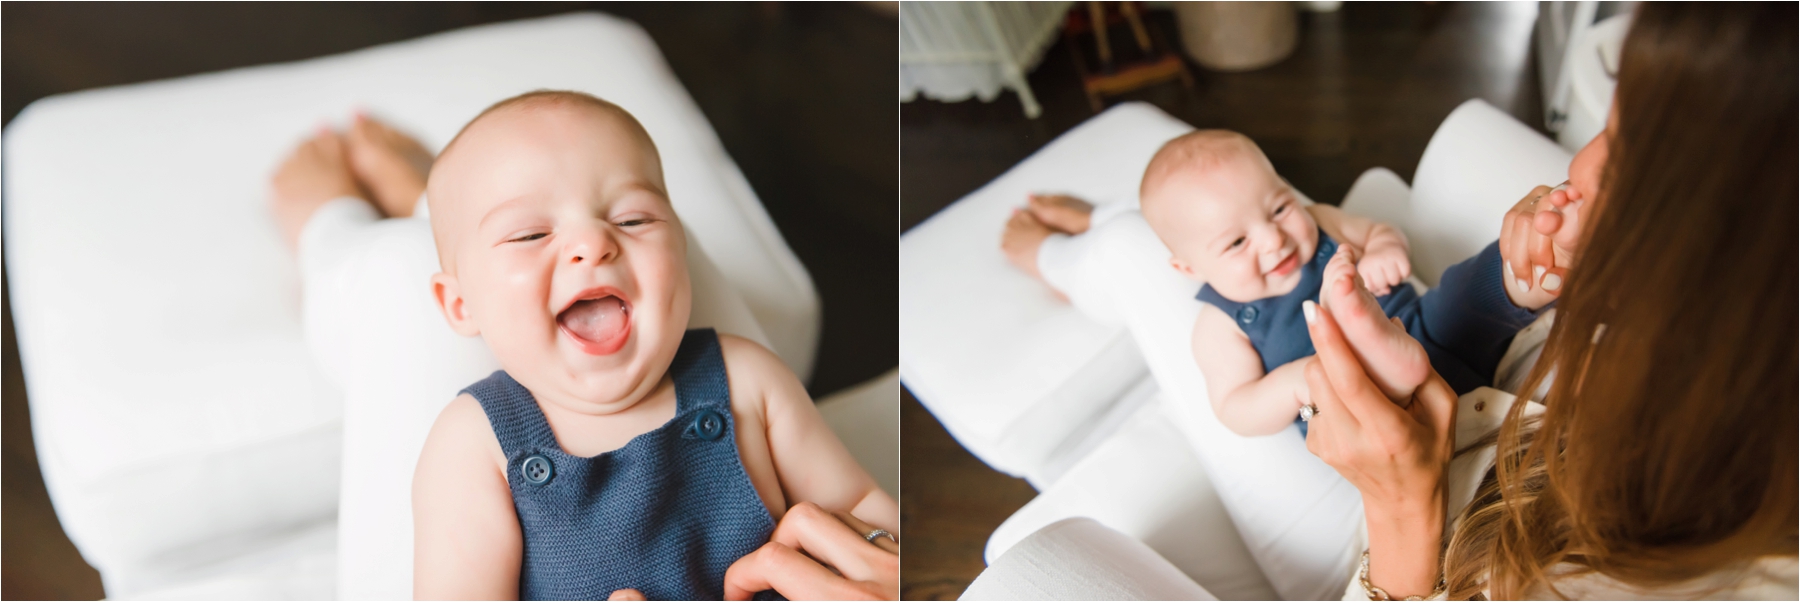 smiling baby lifestyle session